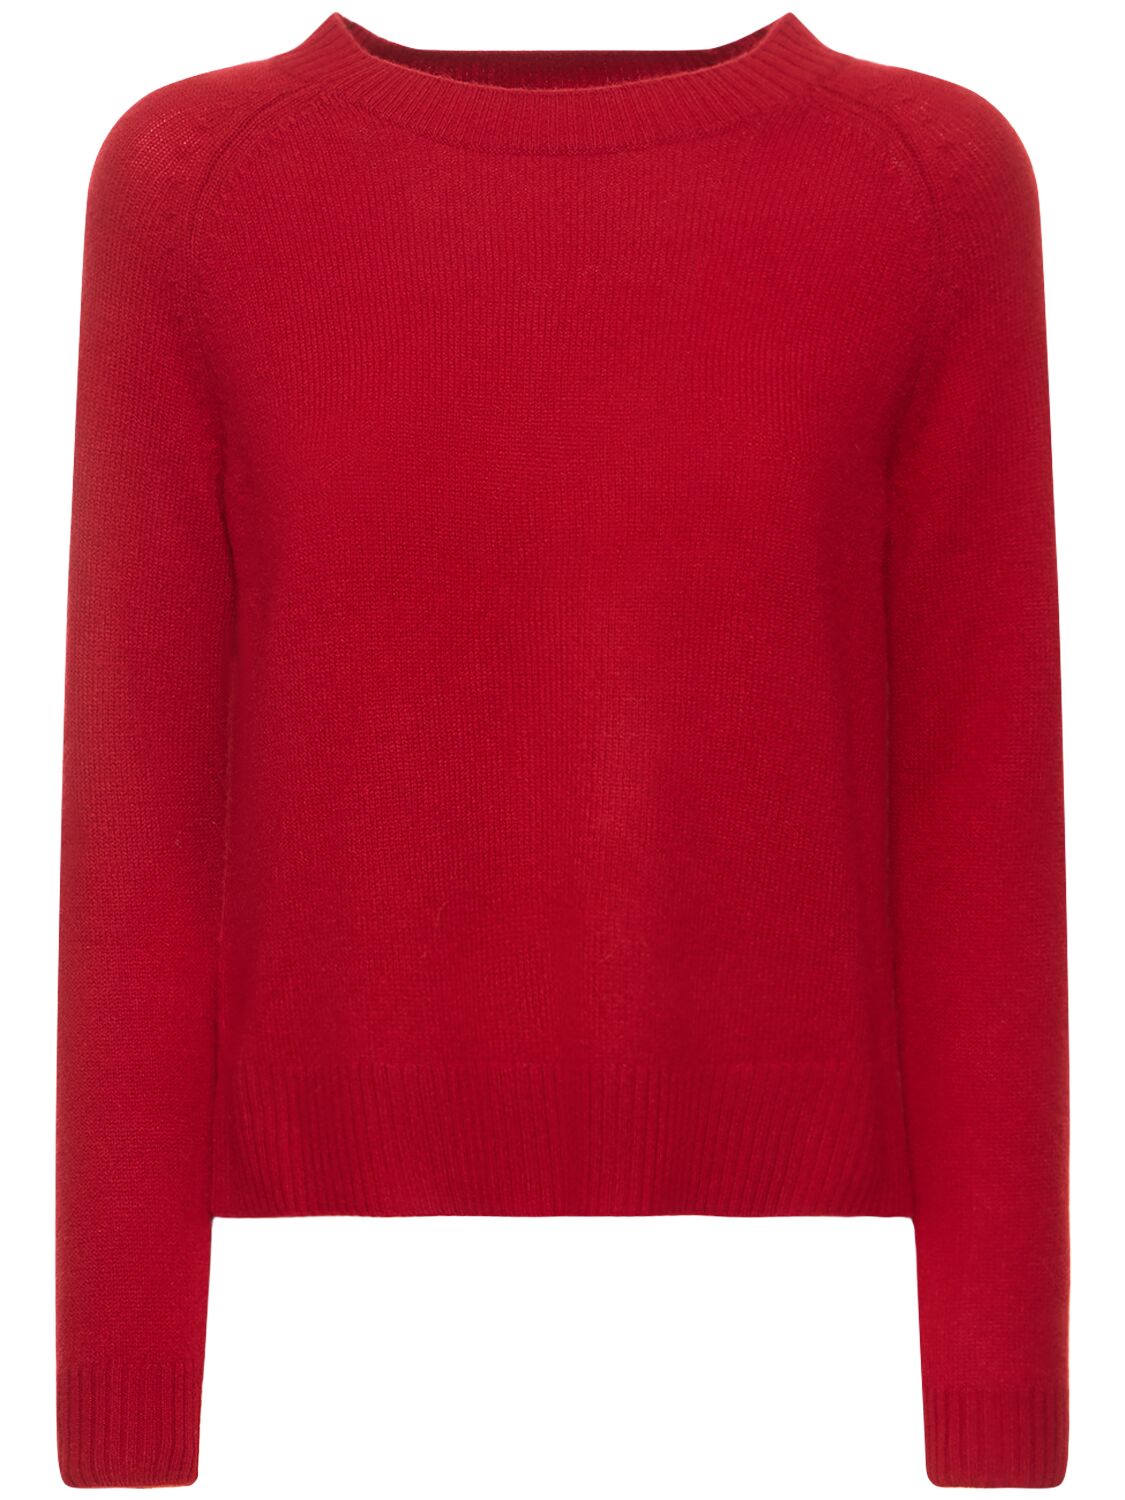 Weekend Max Mara Scatola Cashmere Knit Sweater In Red